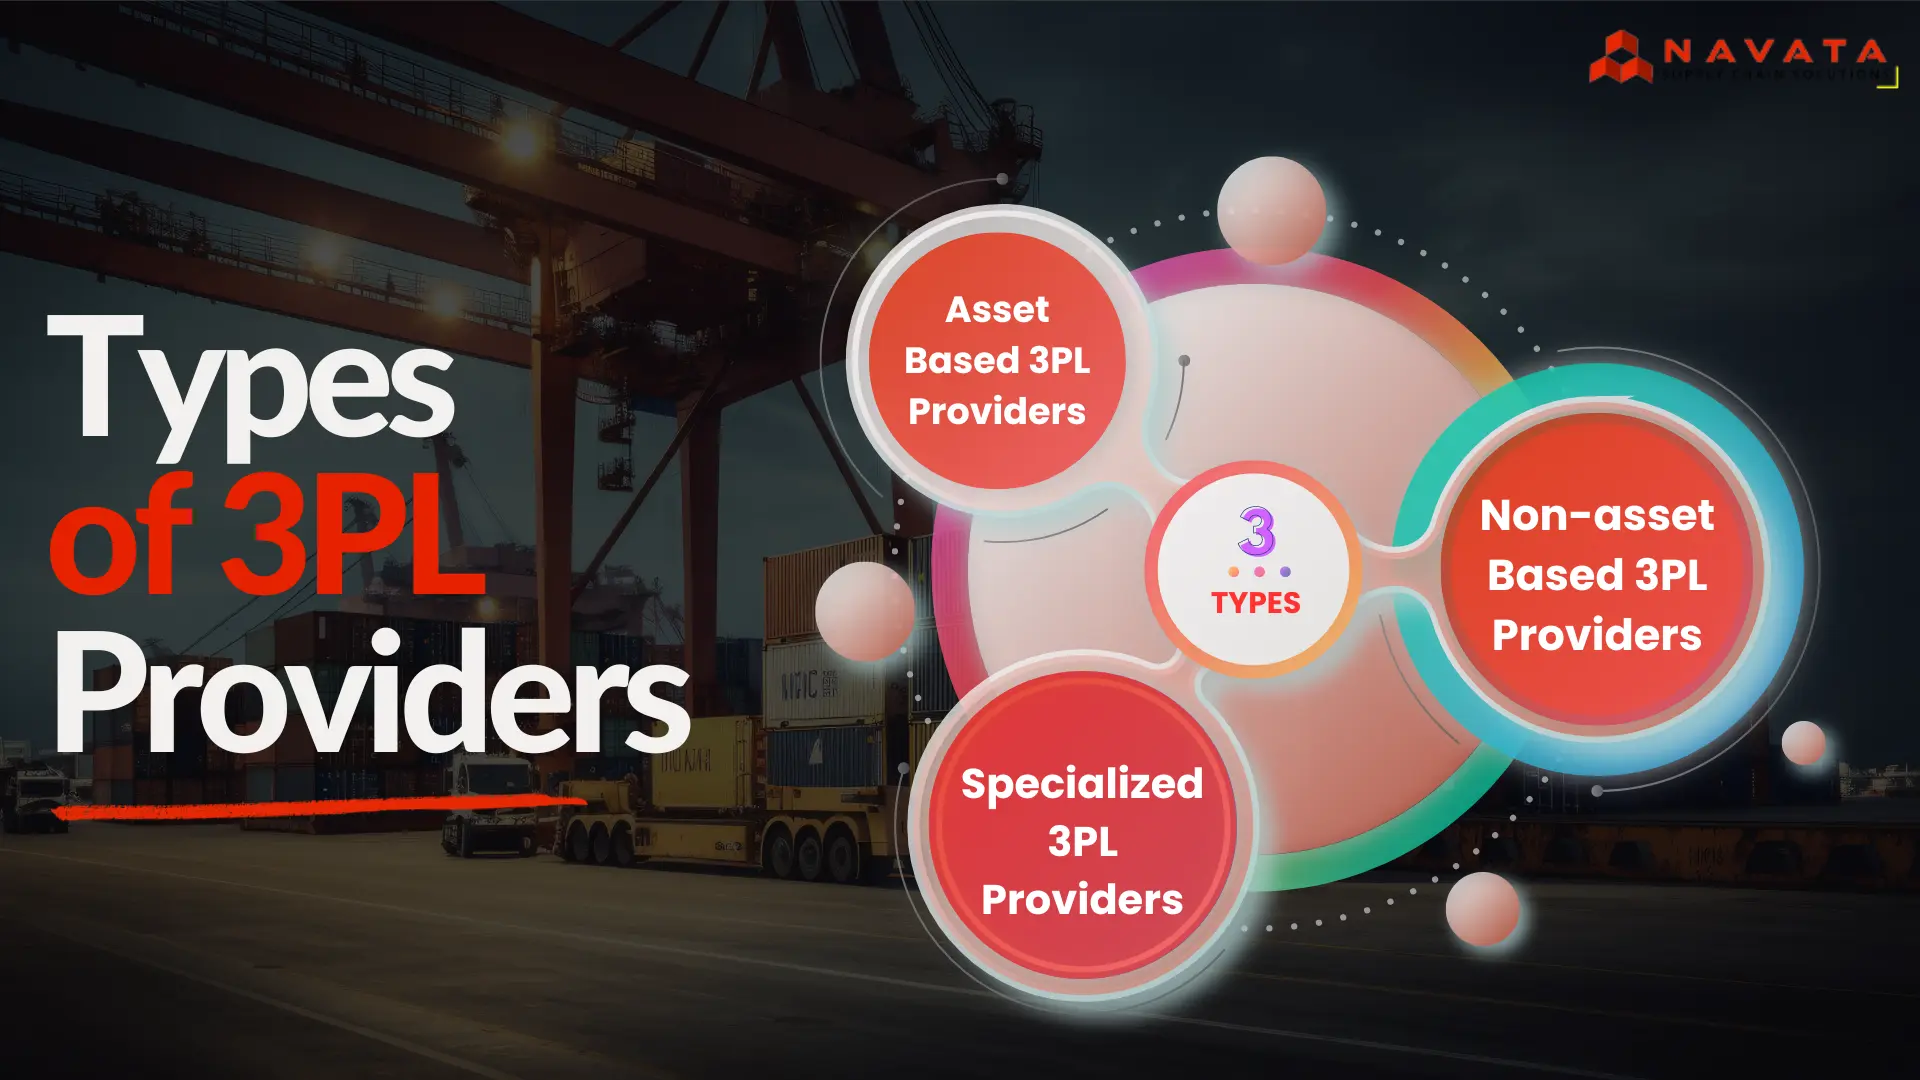 Types of 3PL Providers